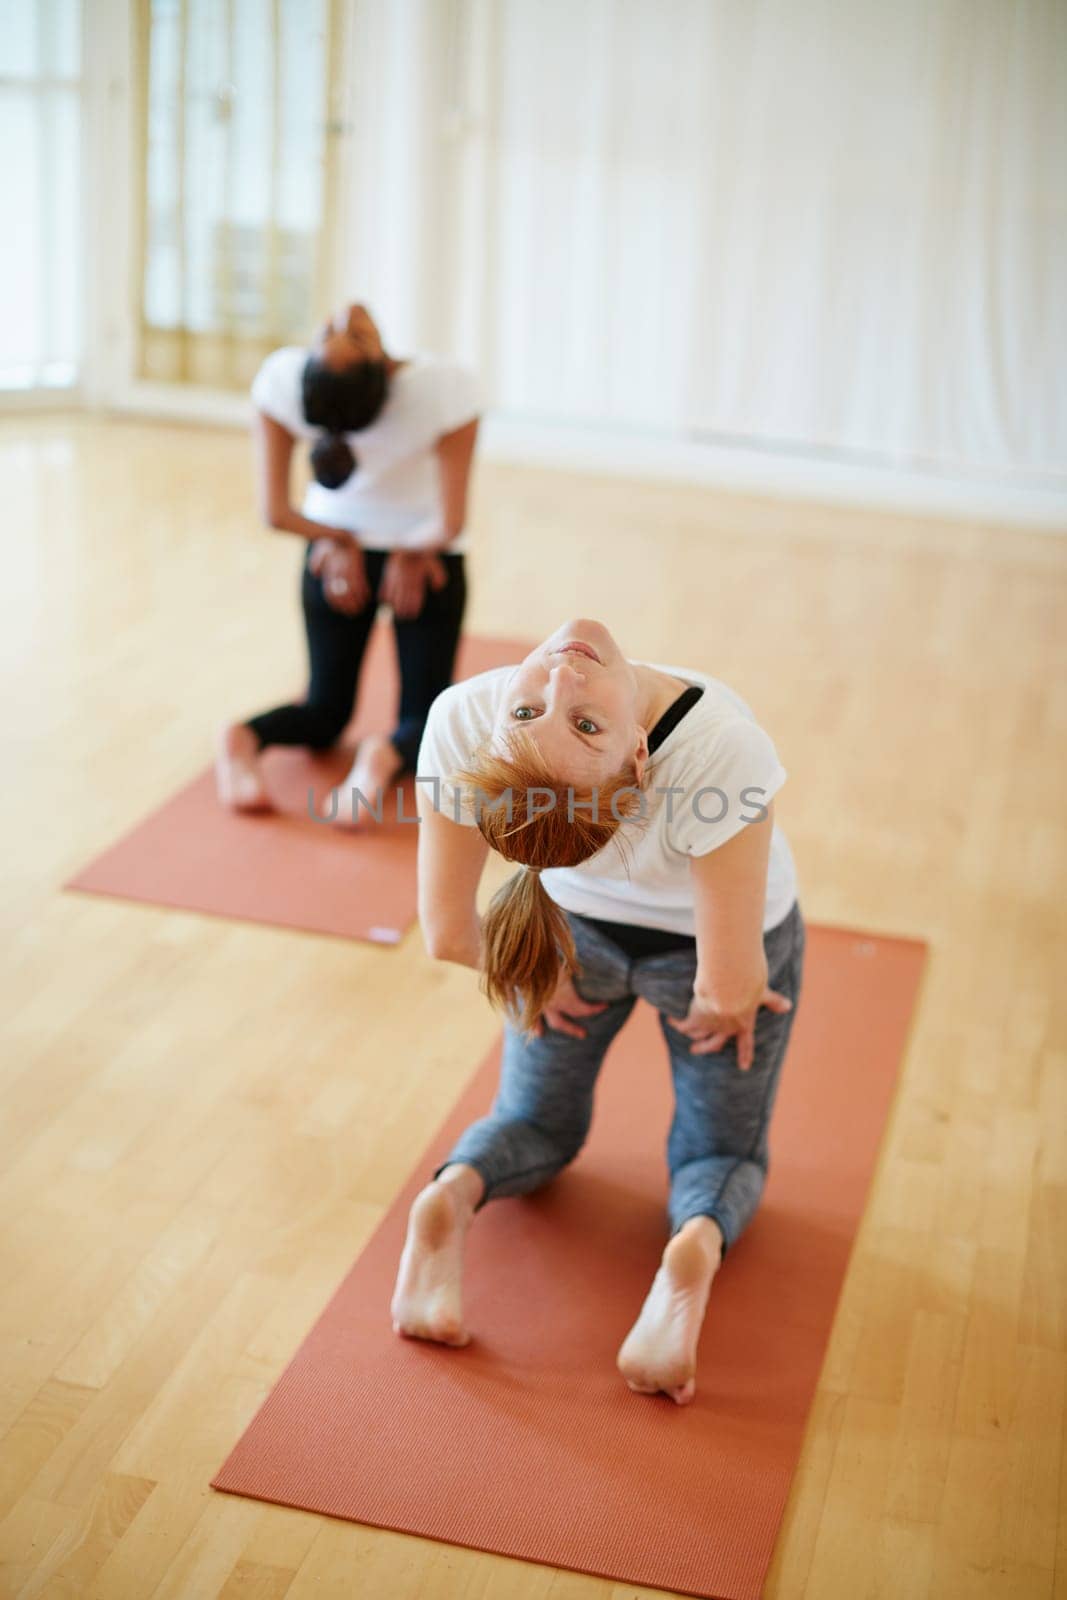 Yoga is part of their daily routine. two women doing yoga together in a studio. by YuriArcurs